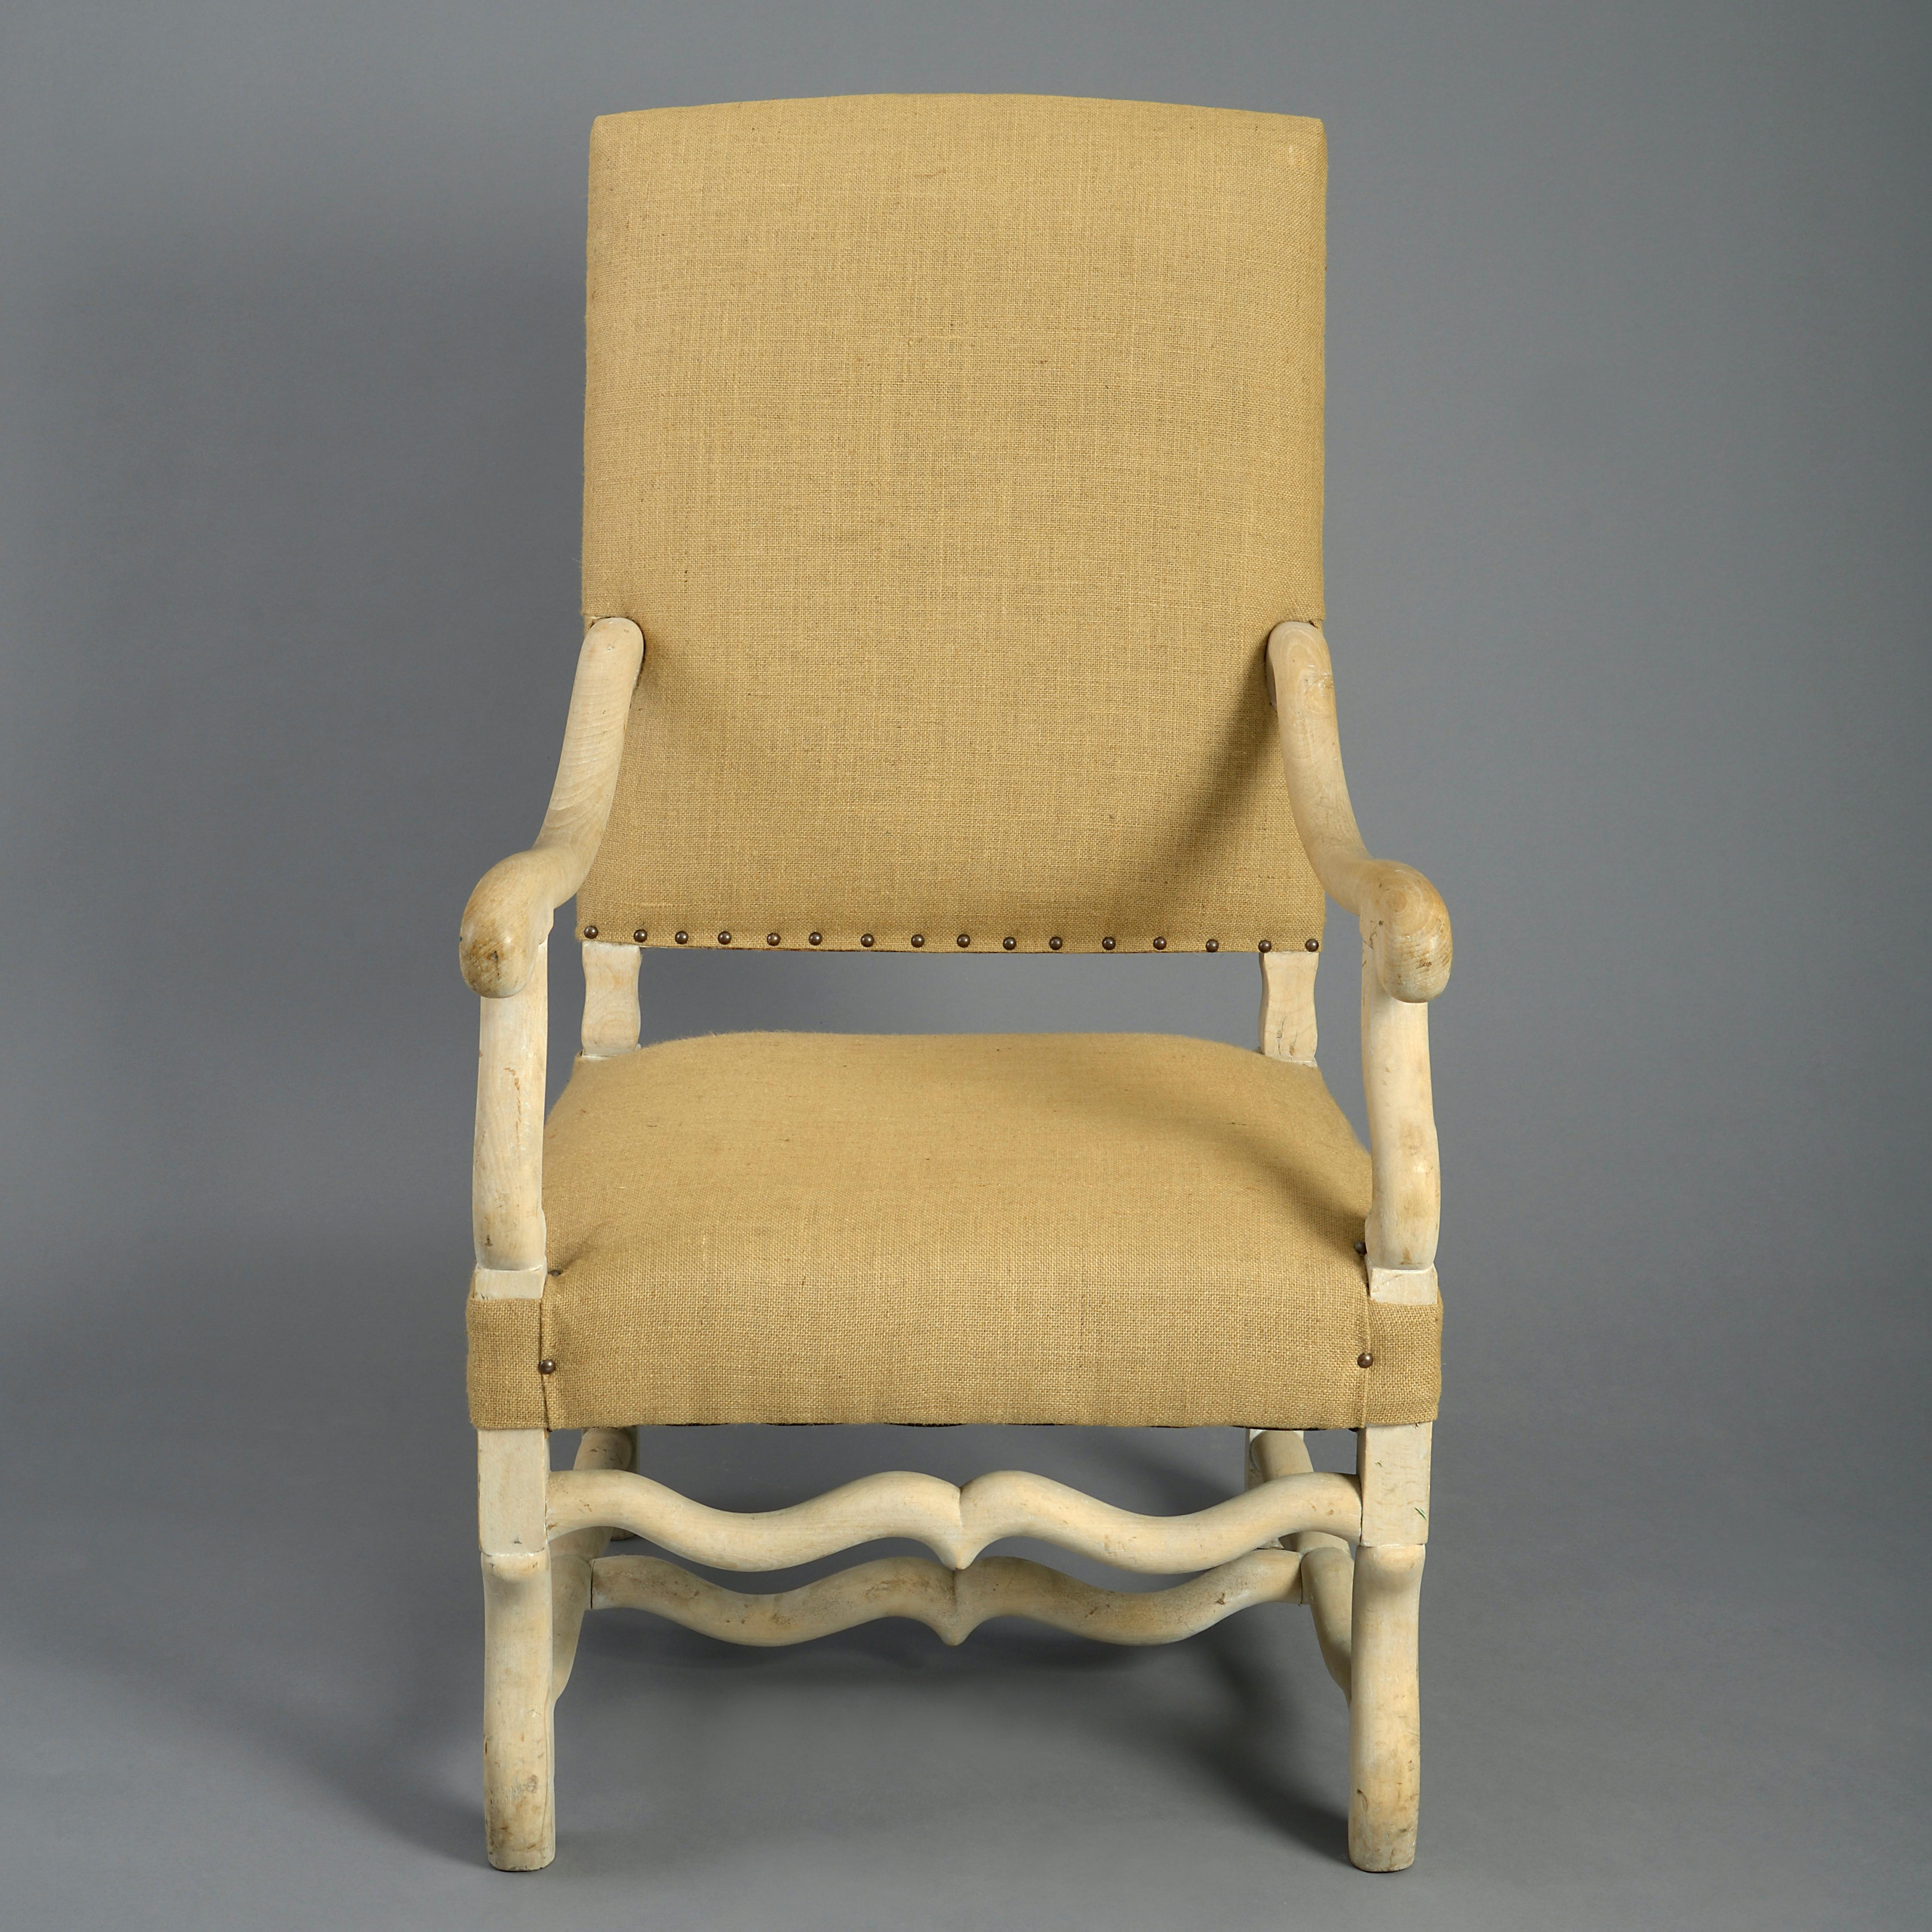 A late 19th century beechwood open armchair in the seventeenth century French Baroque manner, the upholstered back and seat with scrolling arms, all supported on scrolling legs with shaped stretchers.